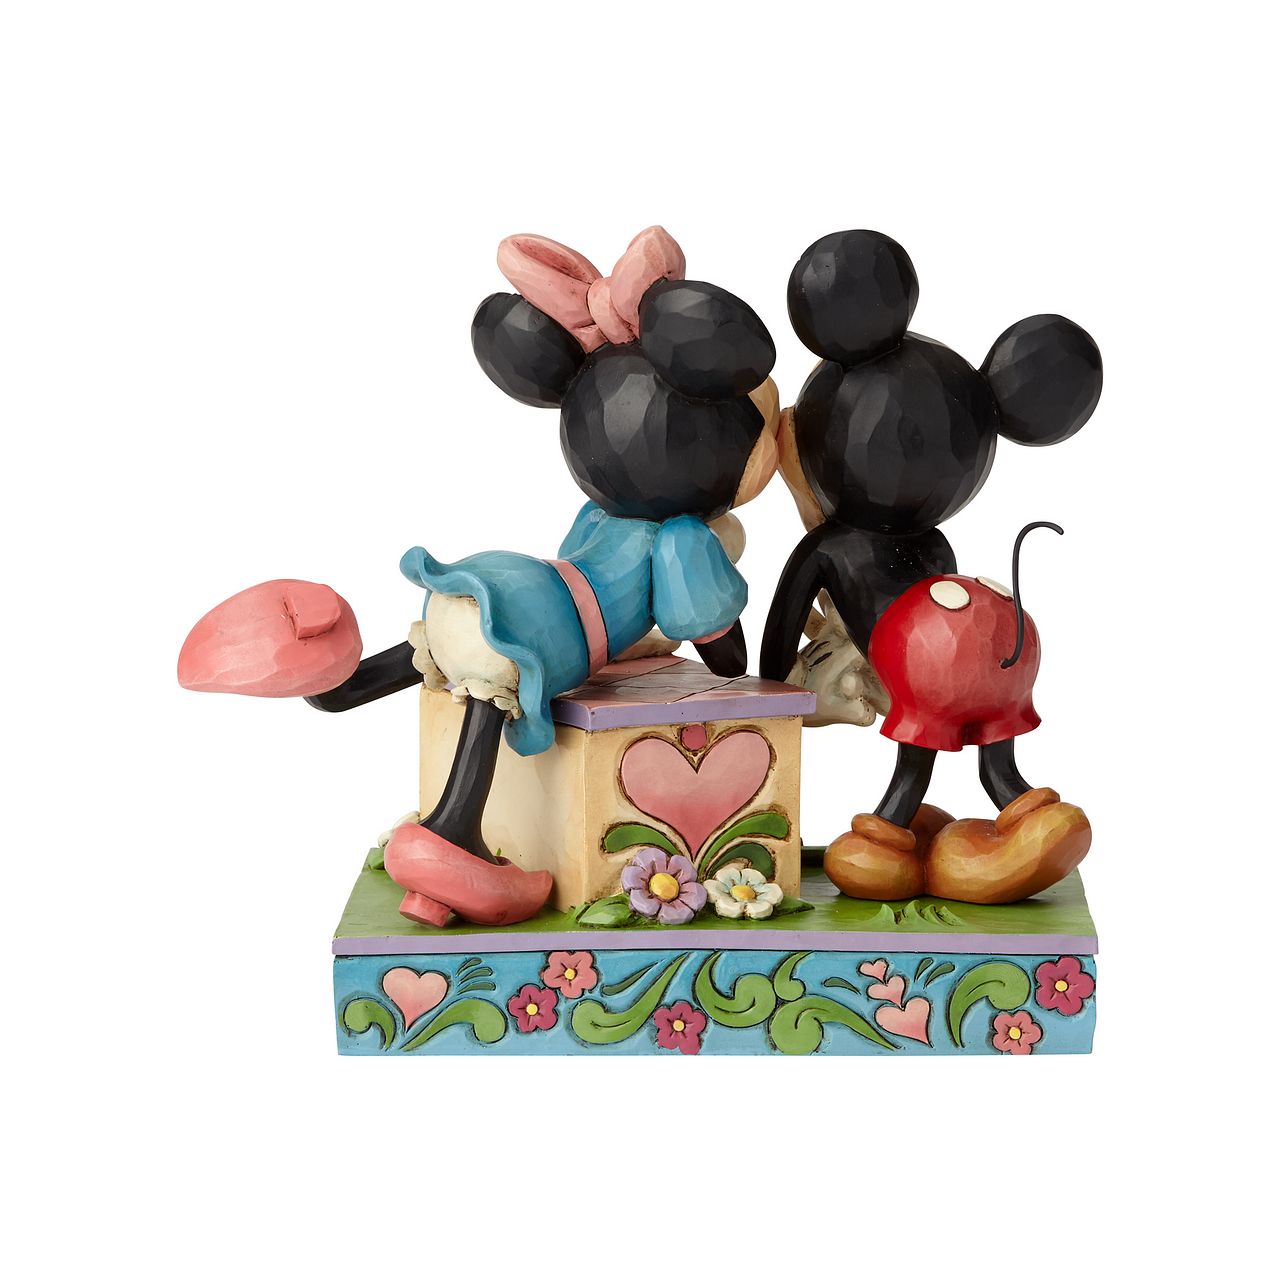 Jim Shore Kissing Booth Mickey Mouse and Minnie Mouse  Minnie leans over a kissing booth to plant a smooch on one very smitten Mickey in this cheeky scene by Jim Shore. Handcrafted in his unique folk art style, the cast stone design features whimsical rosemaling and quilt patterns.